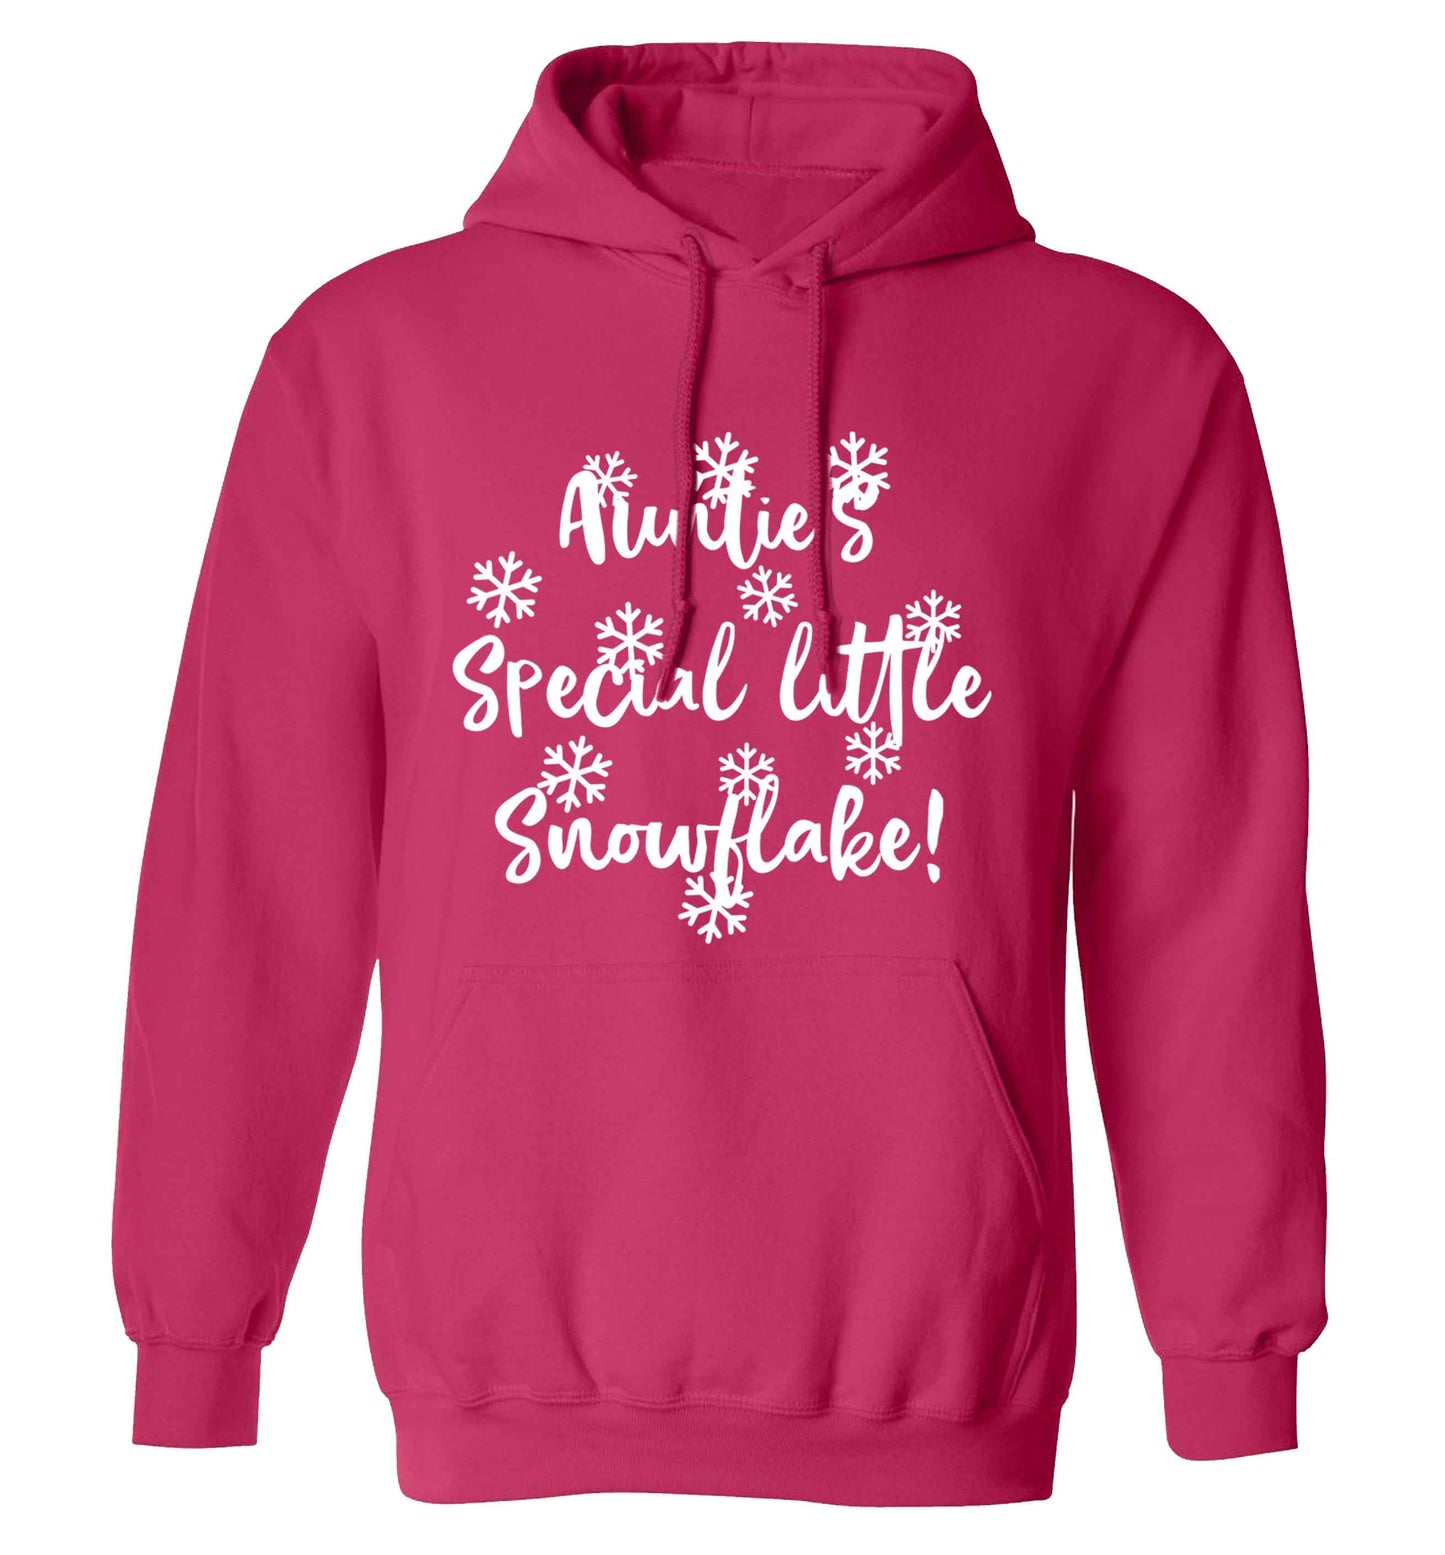 Auntie's special little snowflake adults unisex pink hoodie 2XL